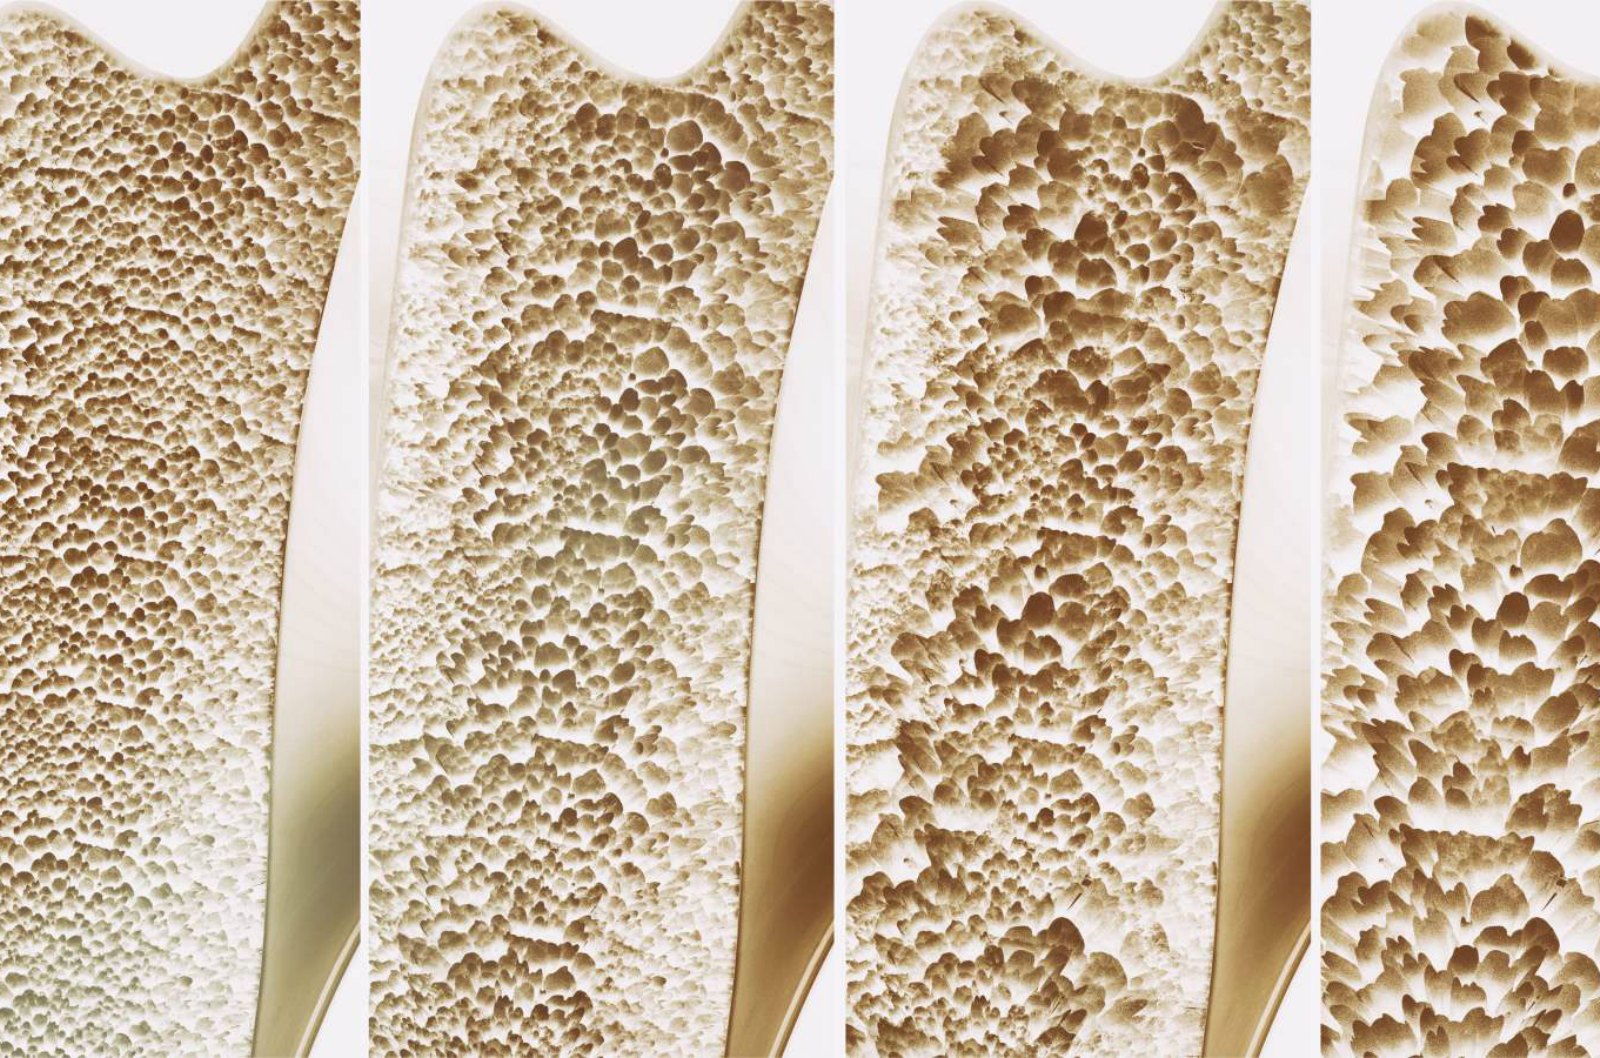 Early Detection and Improved Protection Against Osteoporosis 